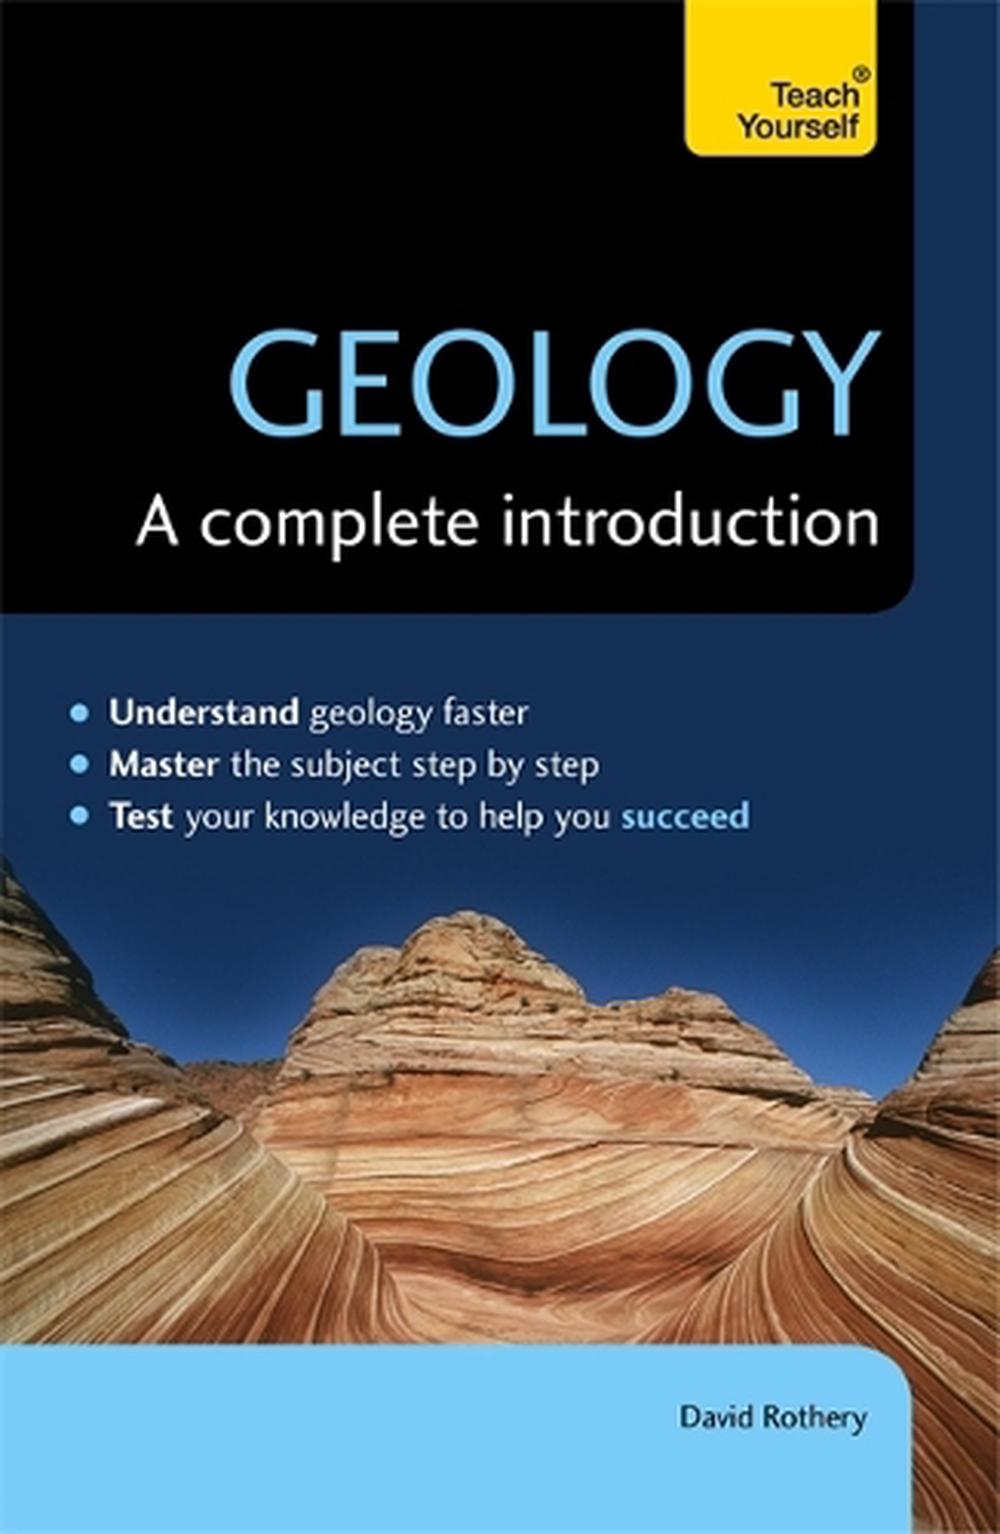 geology introduction essay